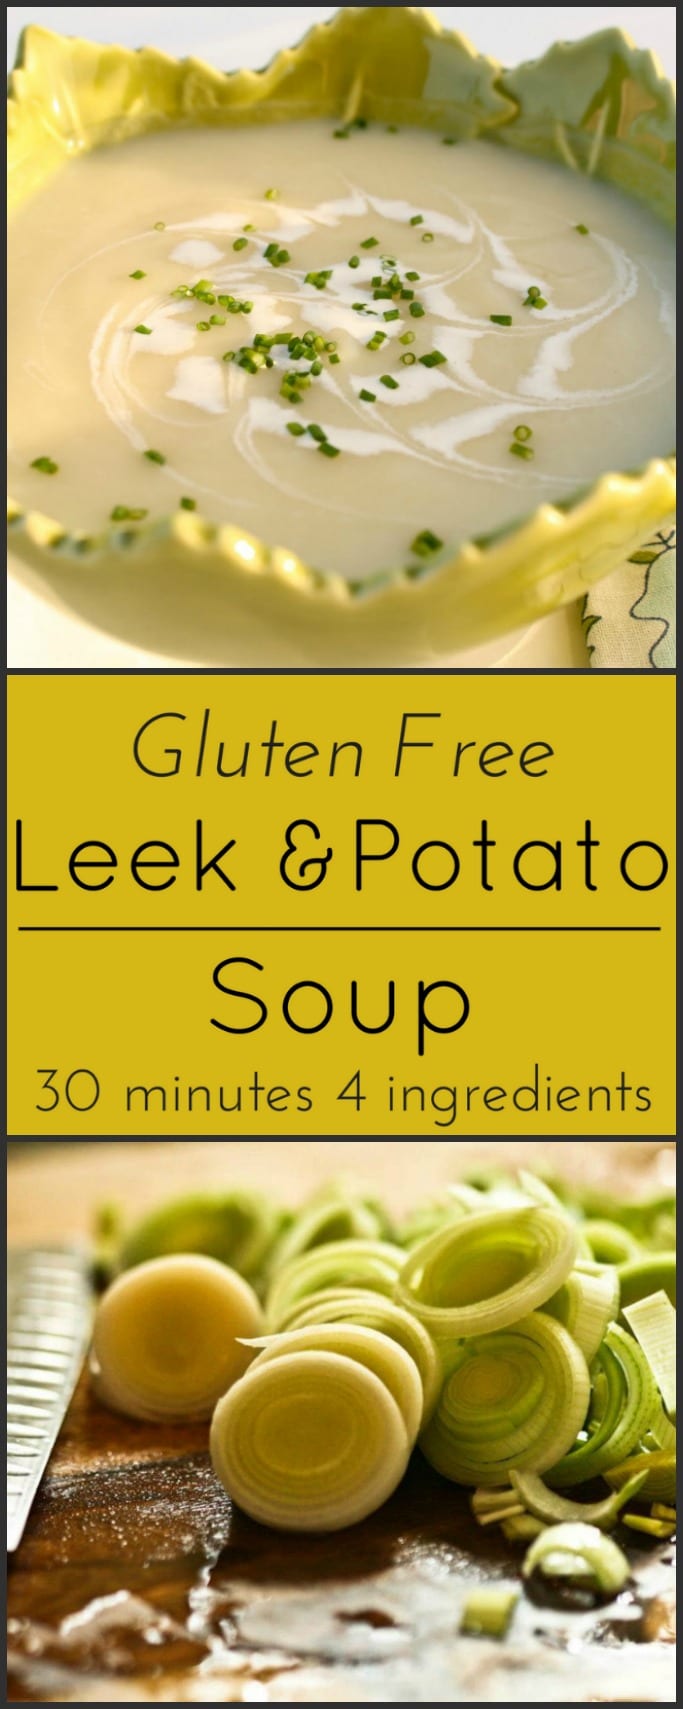 Potato Leek Soup is a basic French soup. It's also naturally gluten free!